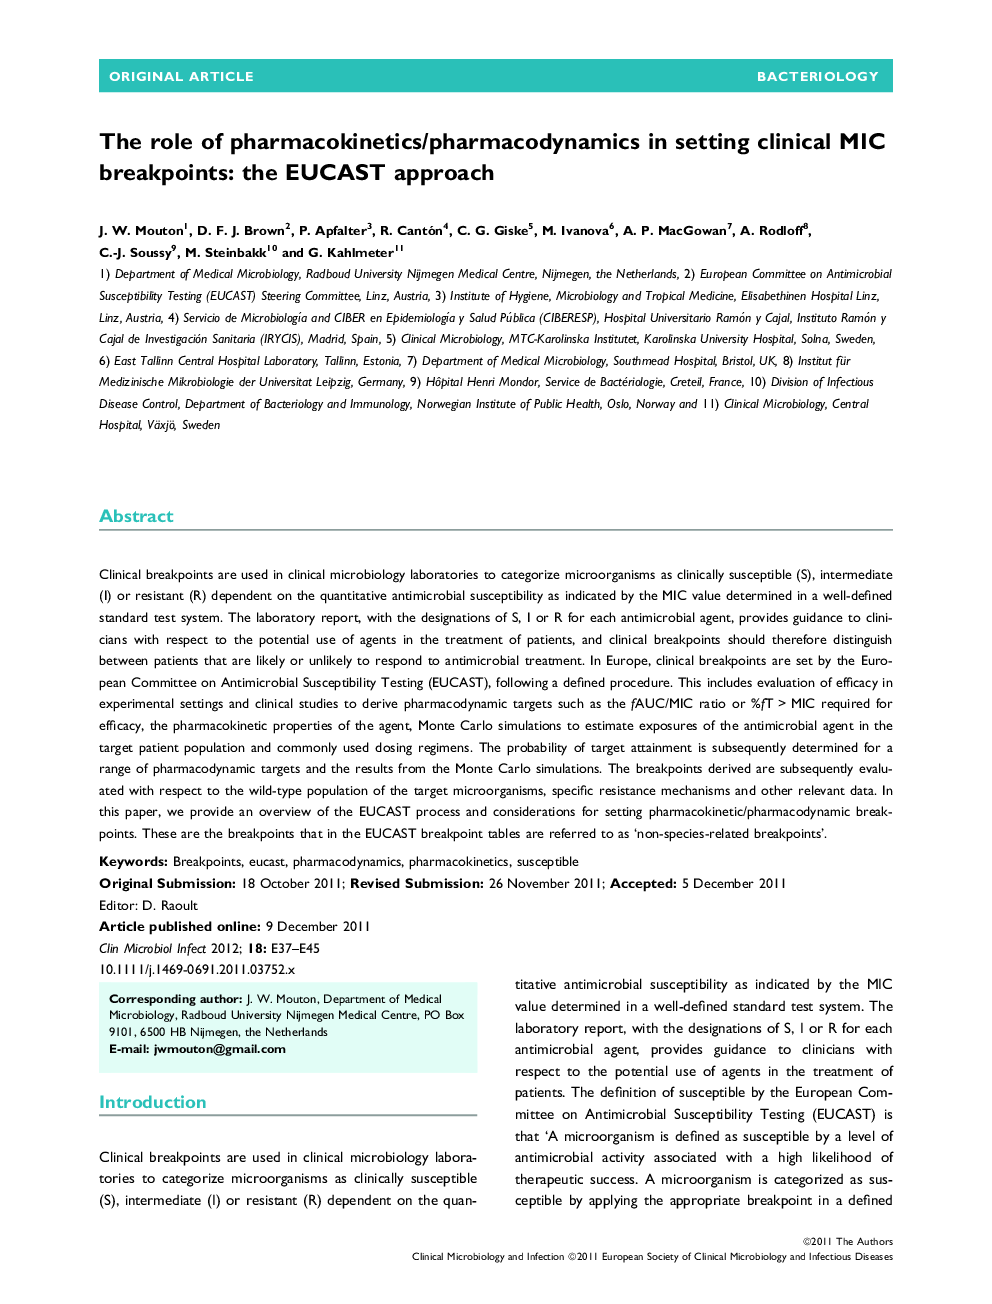 The role of pharmacokinetics/pharmacodynamics in setting clinical MIC breakpoints: the EUCAST approach 